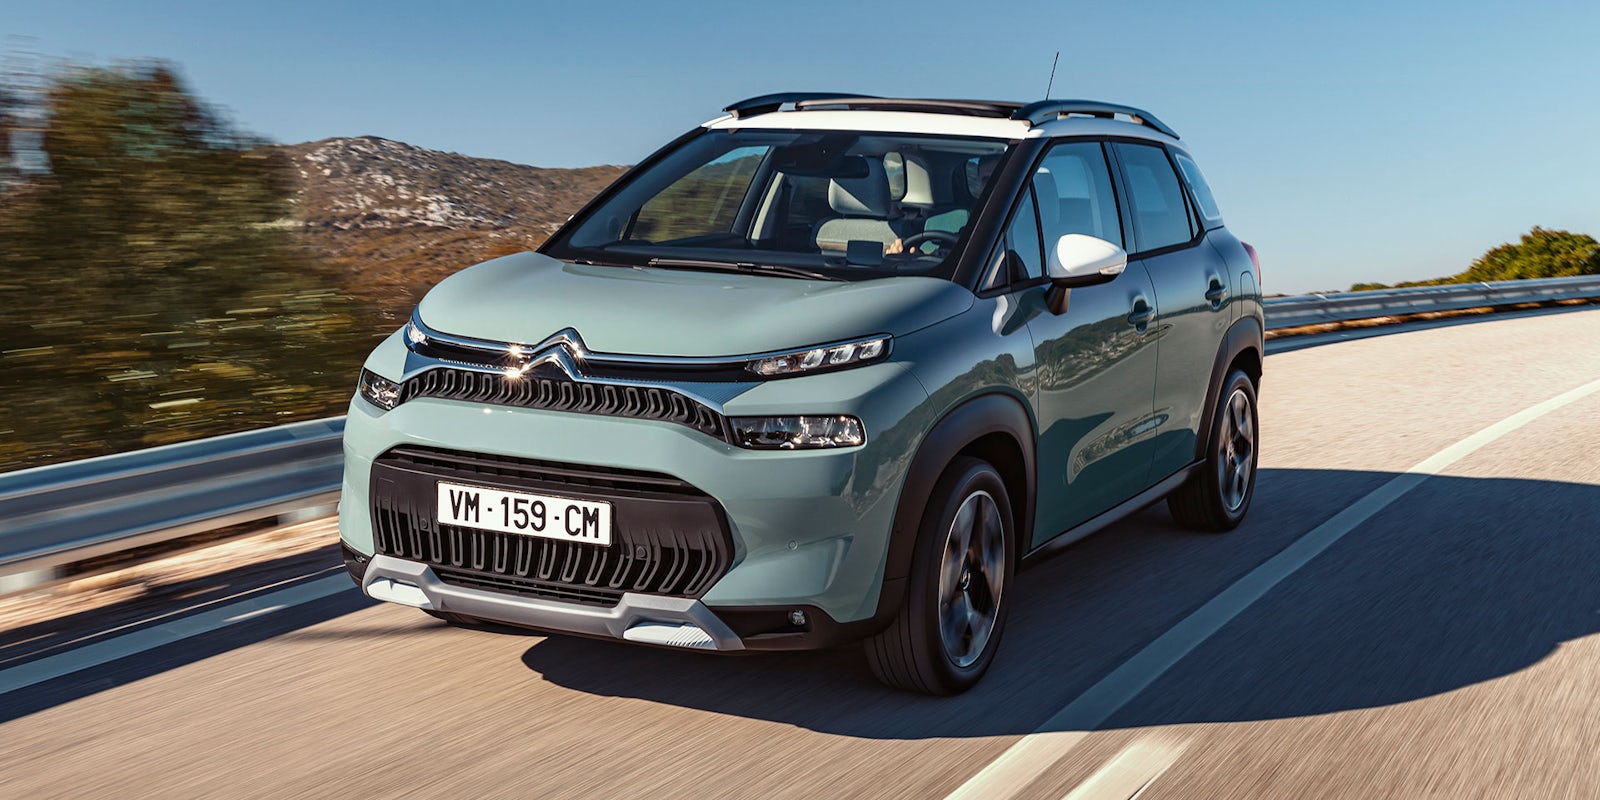 2021 Citroen C3 Aircross On Sale Now: Price And Specs | Carwow